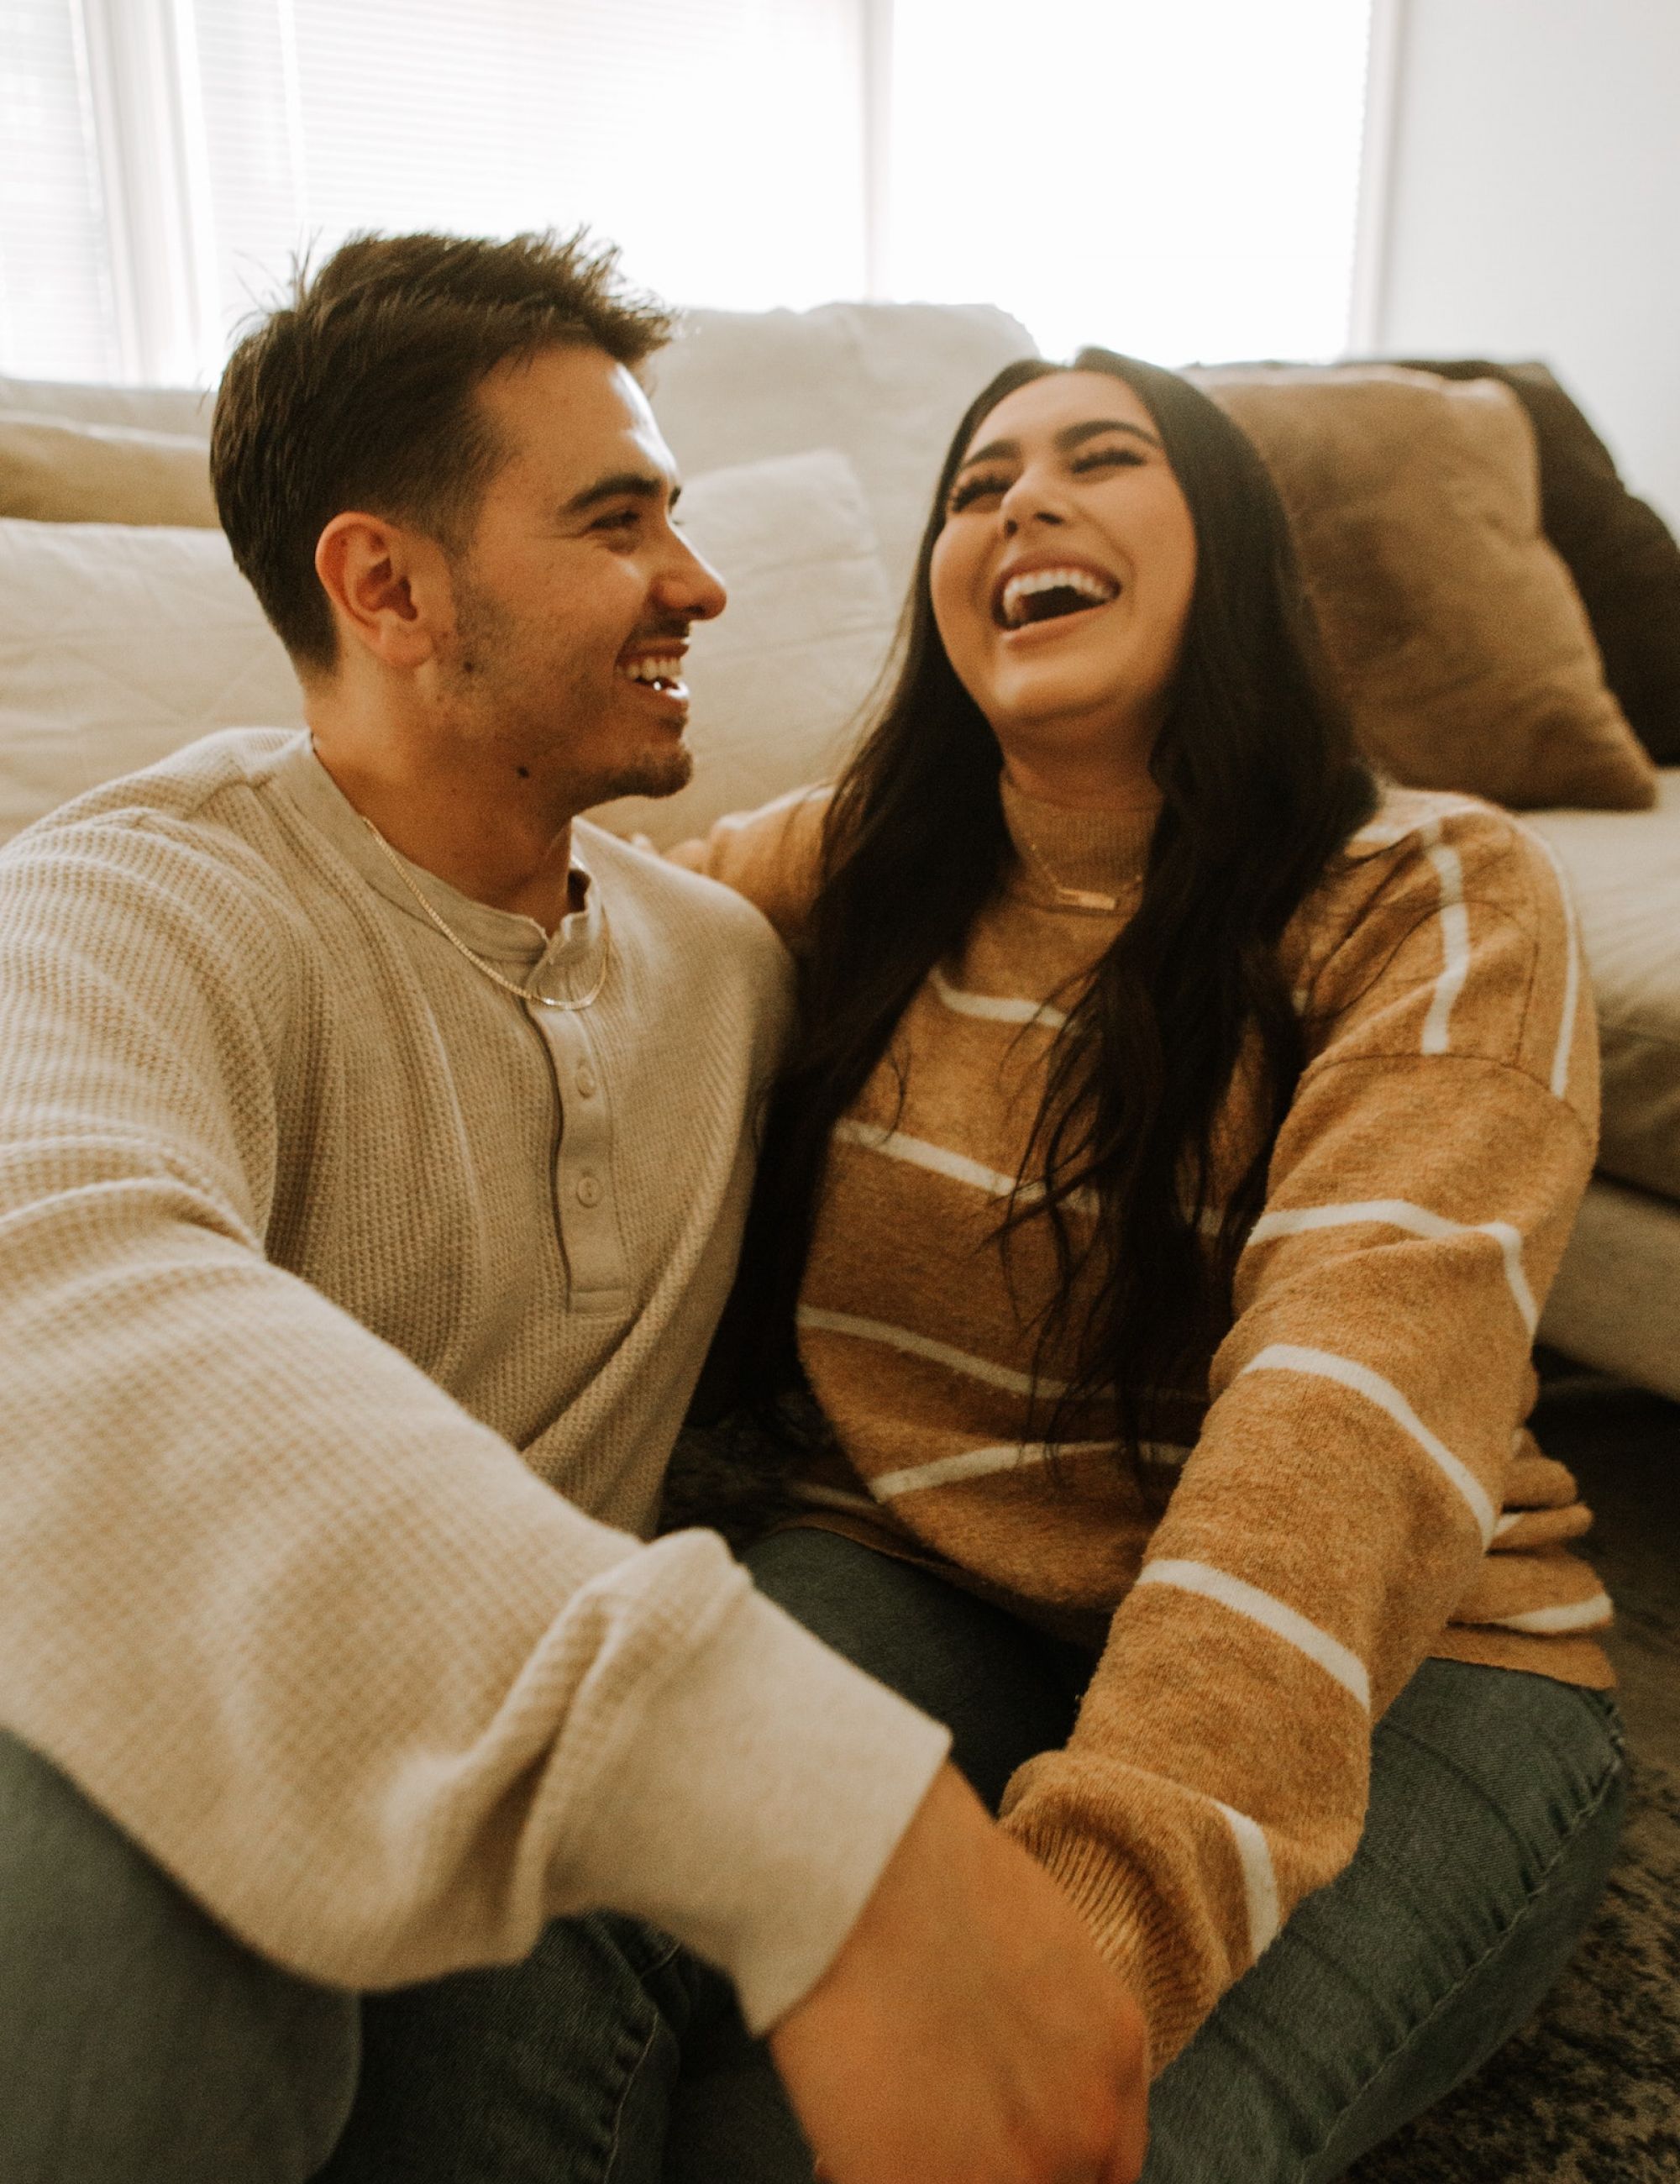 Latin couple sitting on floor laughing and smiling